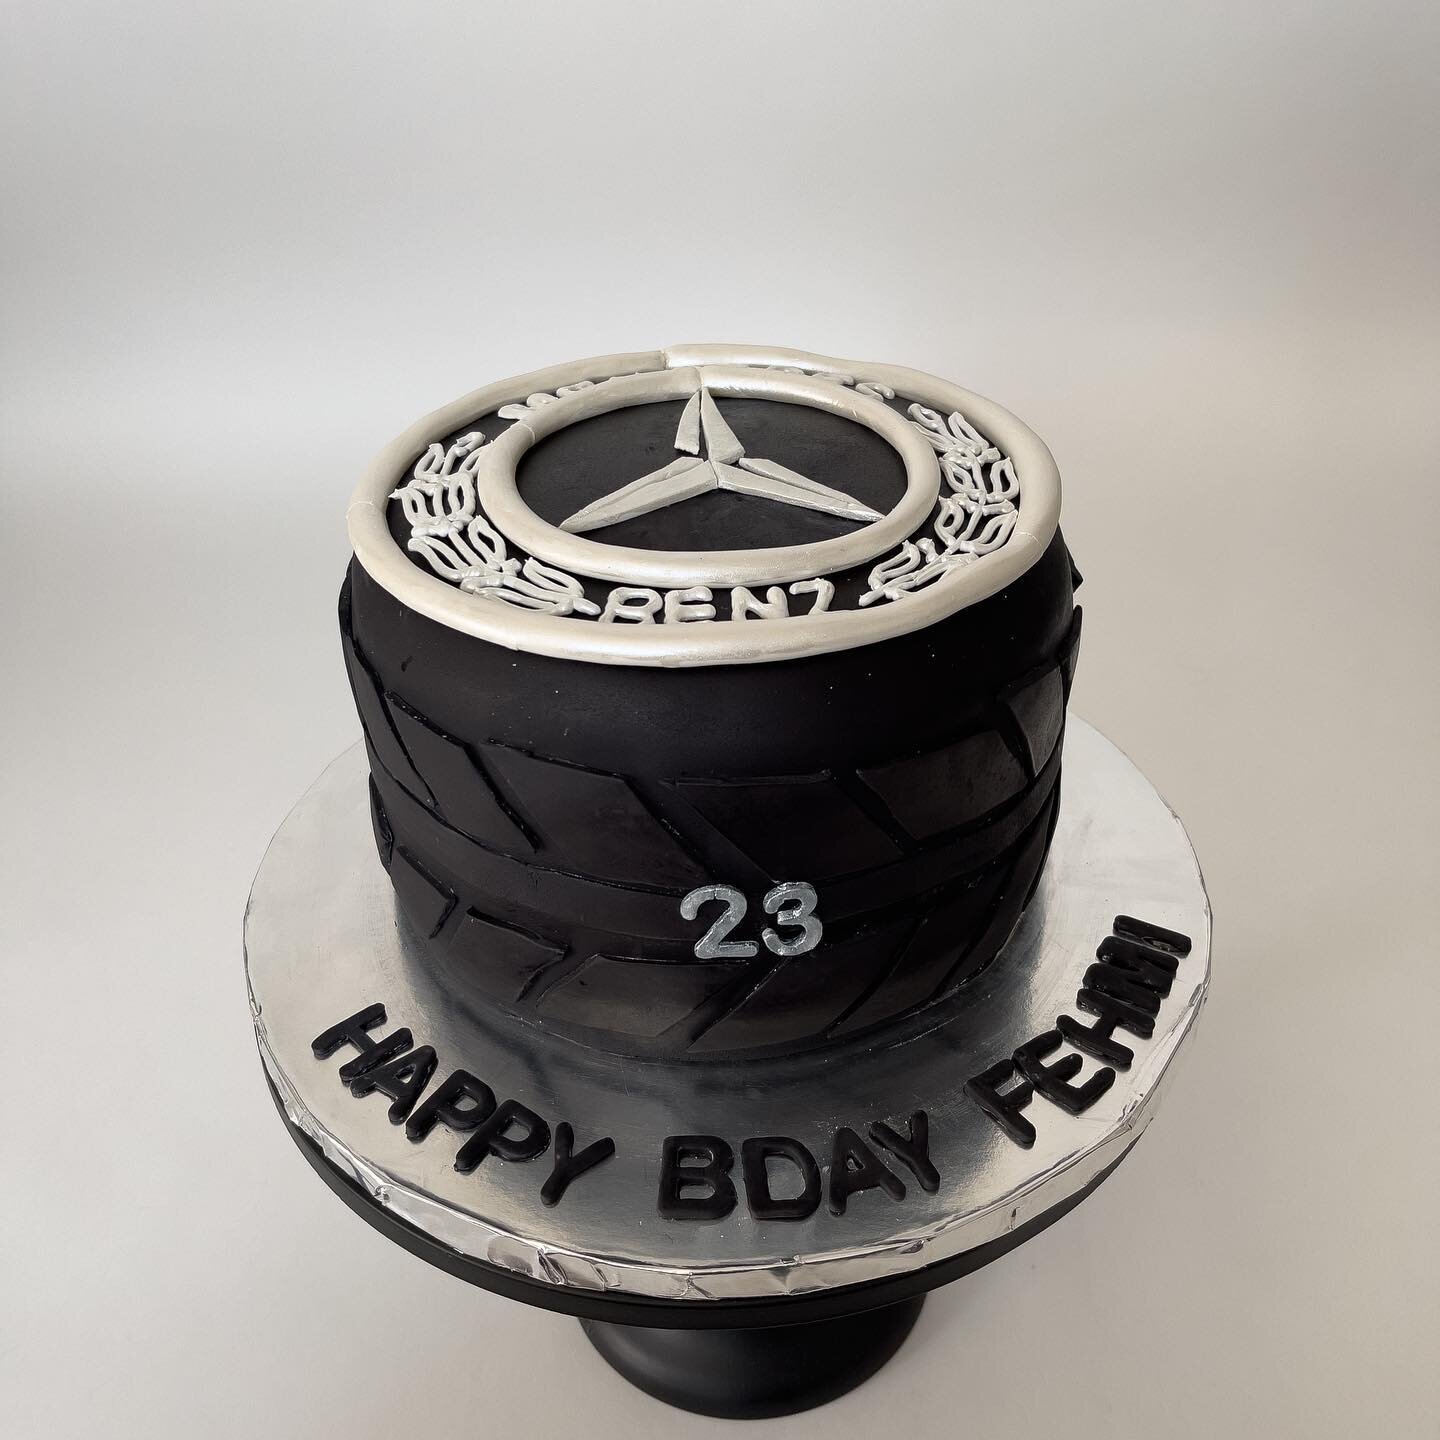 When your asked for a wheel cake &amp; logo&hellip;you give it to them! 🚙 #customcakes #gourmet #carcake #chocolatecake #brigadeirofilling #blairstown #hackettstown